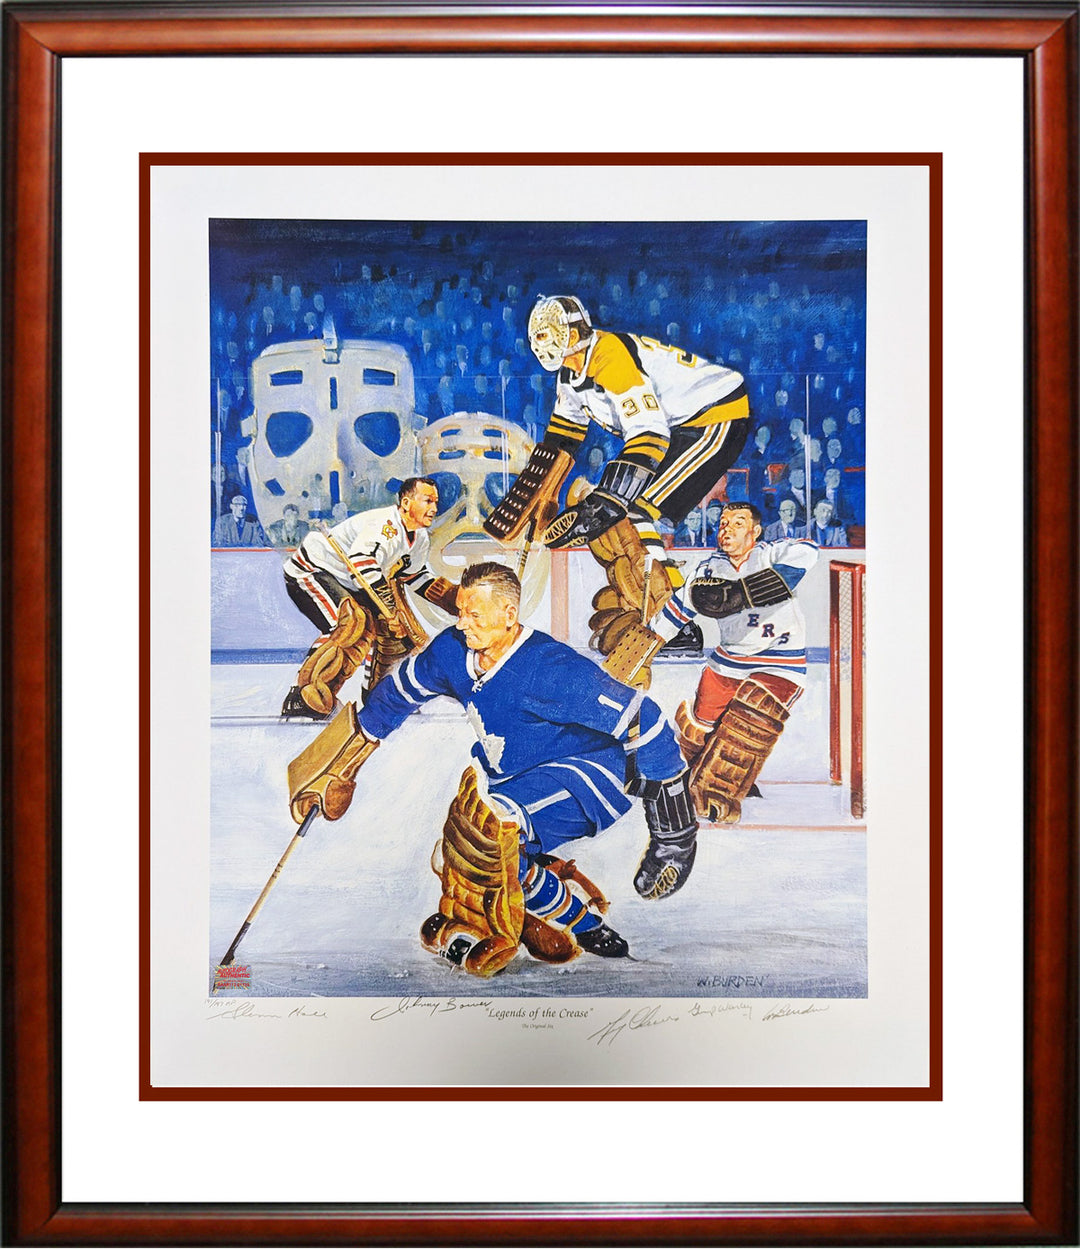 Framed Signed Litho: Bower, Cheevers, Hall, Worsely Ltd Ed Artist Proof Of 197, Original Six, NHL, Hockey, Autographed, Signed, AALCH33193